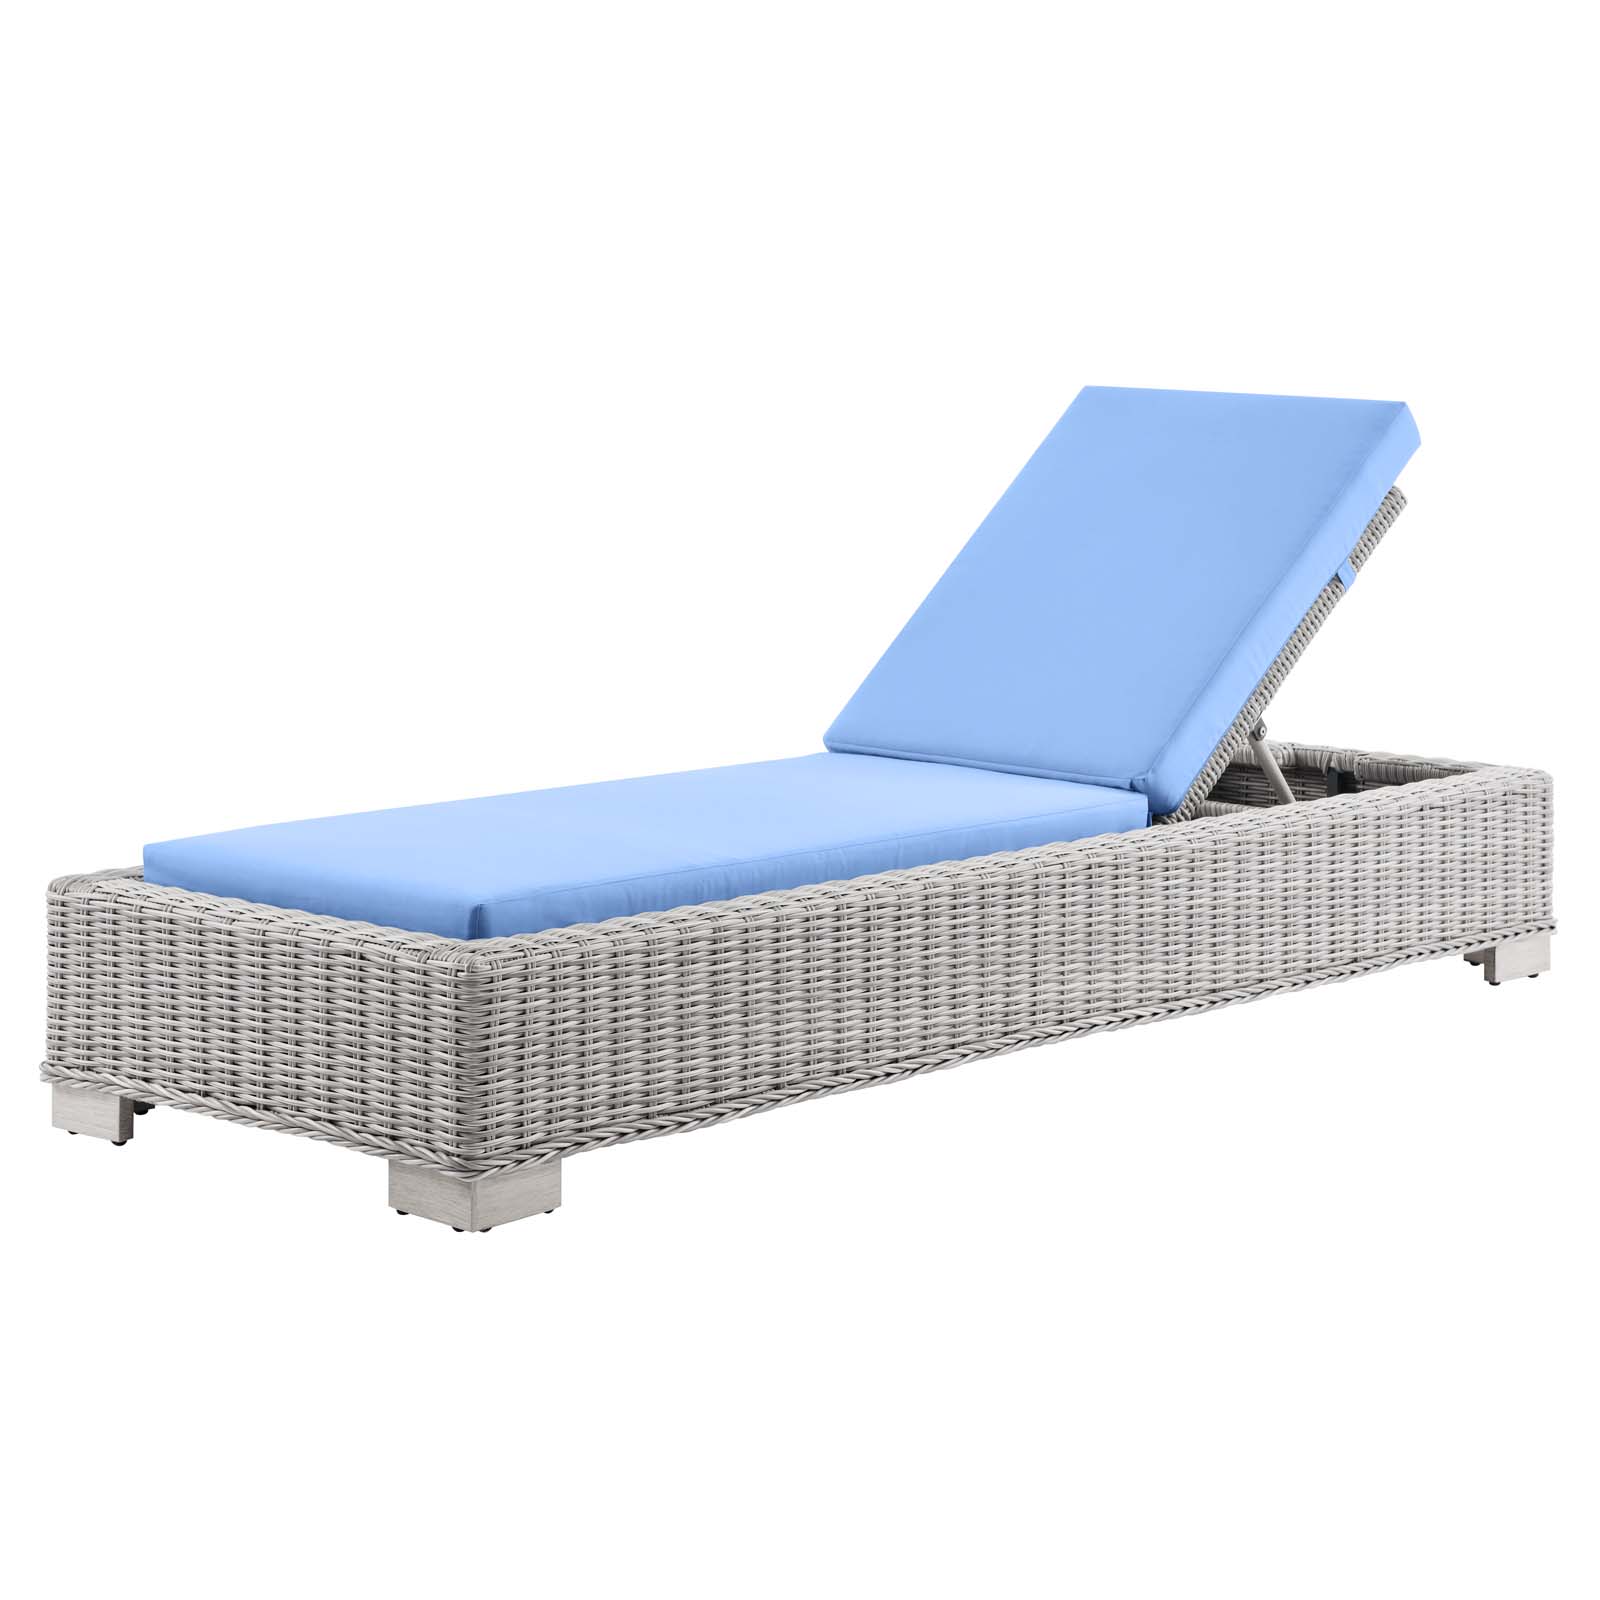 Lounge Chair Chaise, Rattan, Wicker, Light Grey Gray Light Blue, Modern Contemporary Urban Design, Outdoor Patio Balcony Cafe Bistro Garden Furniture Hotel Hospitality - image 1 of 9